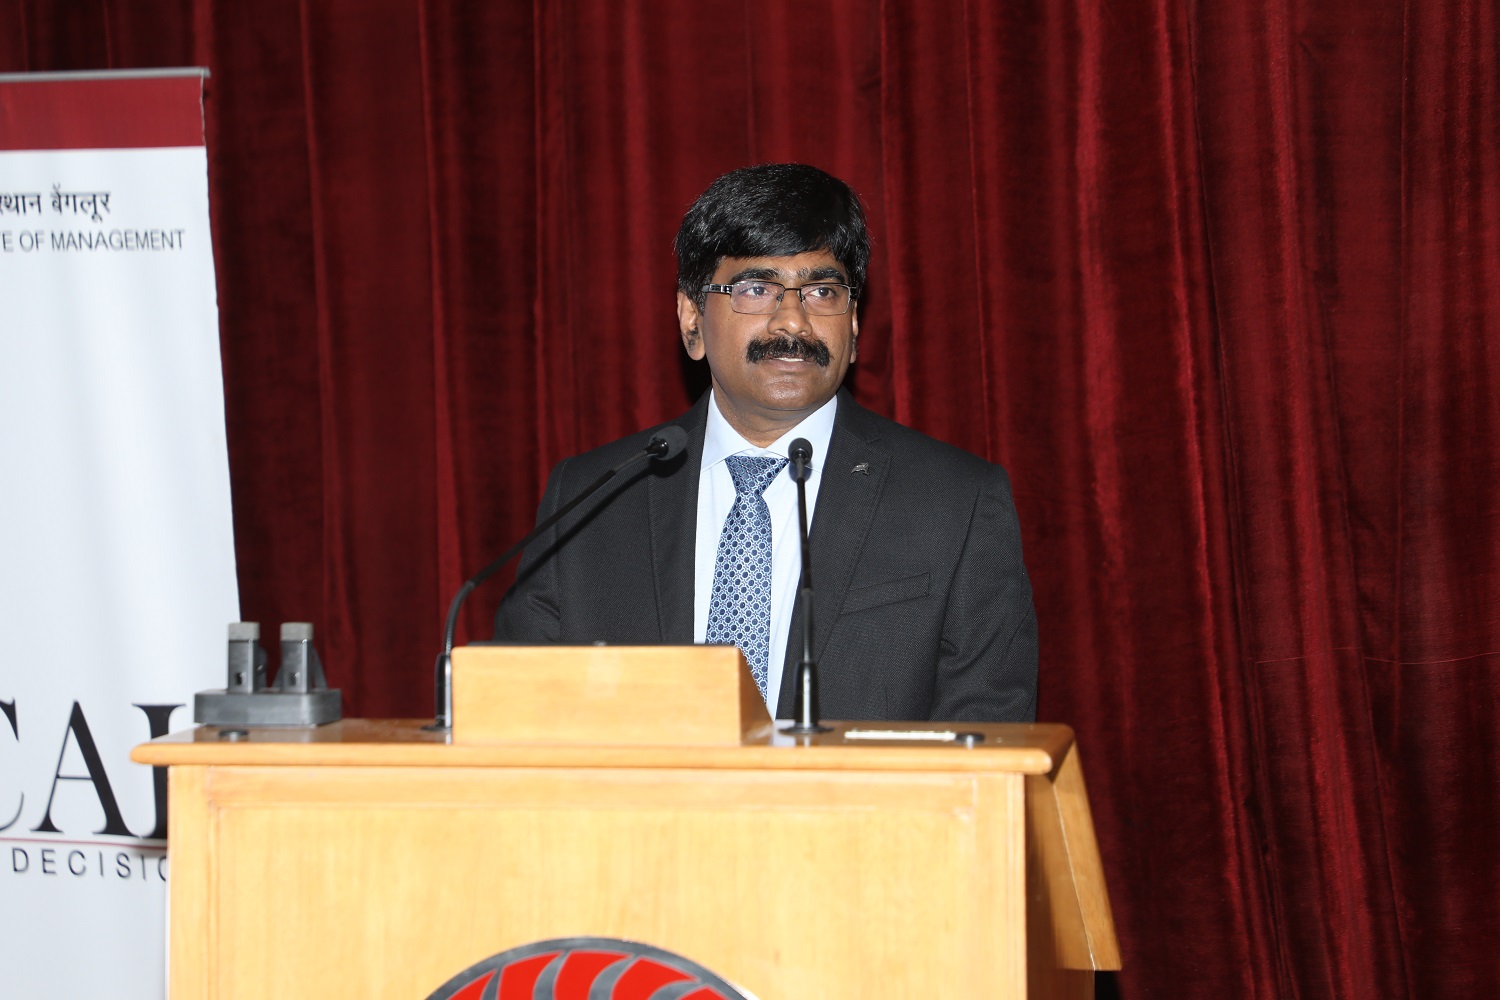 Dr. U Dinesh Kumar, Chairperson of the Data Centre and Analytics Lab at IIMB, delivers the welcome address.